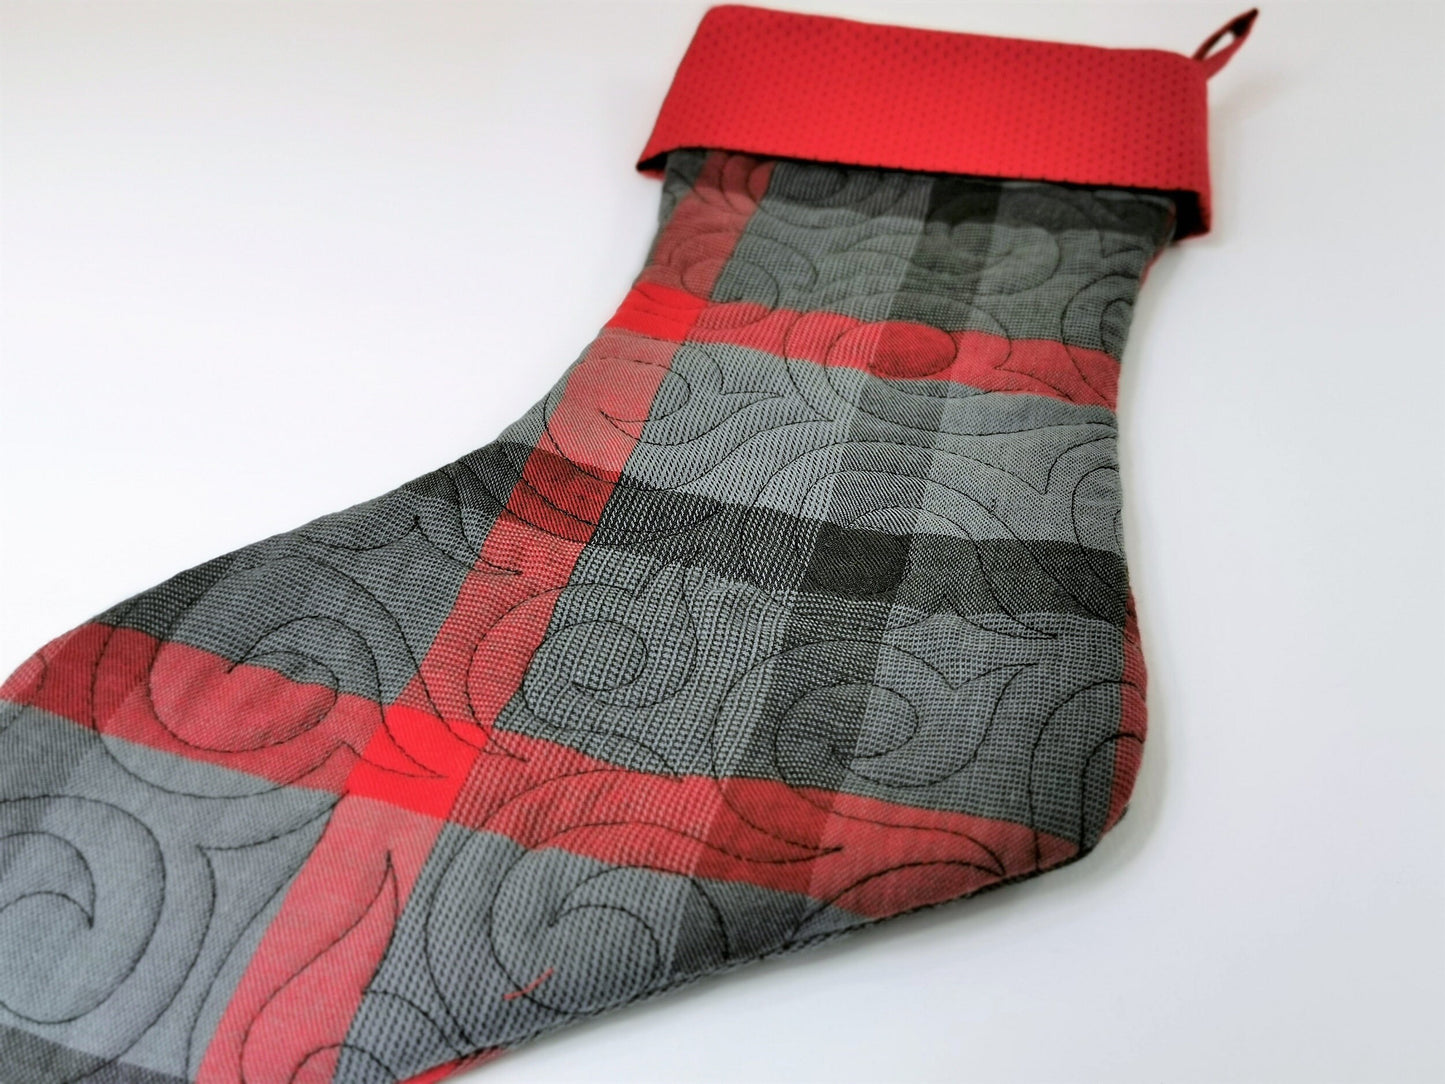 soft plaid christmas stocking has interesting quilting texture